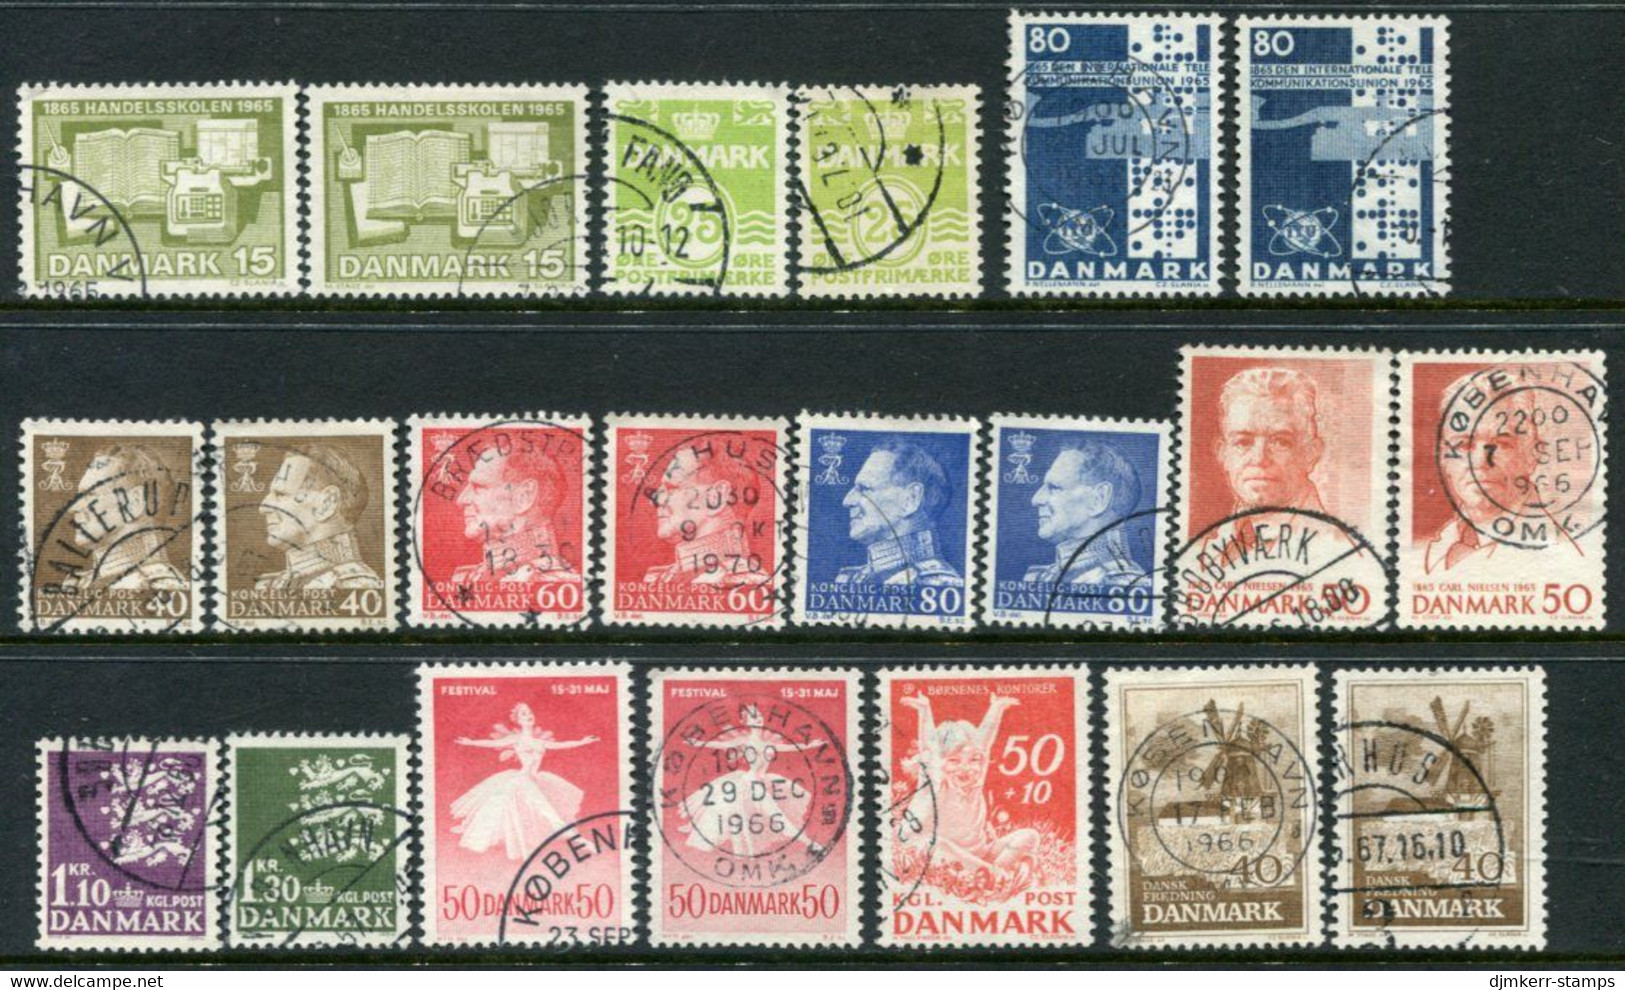 DENMARK 1965 Complete Issues With Ordinary And Fluorescent Papers, Used Michel 426x-437y - Gebruikt